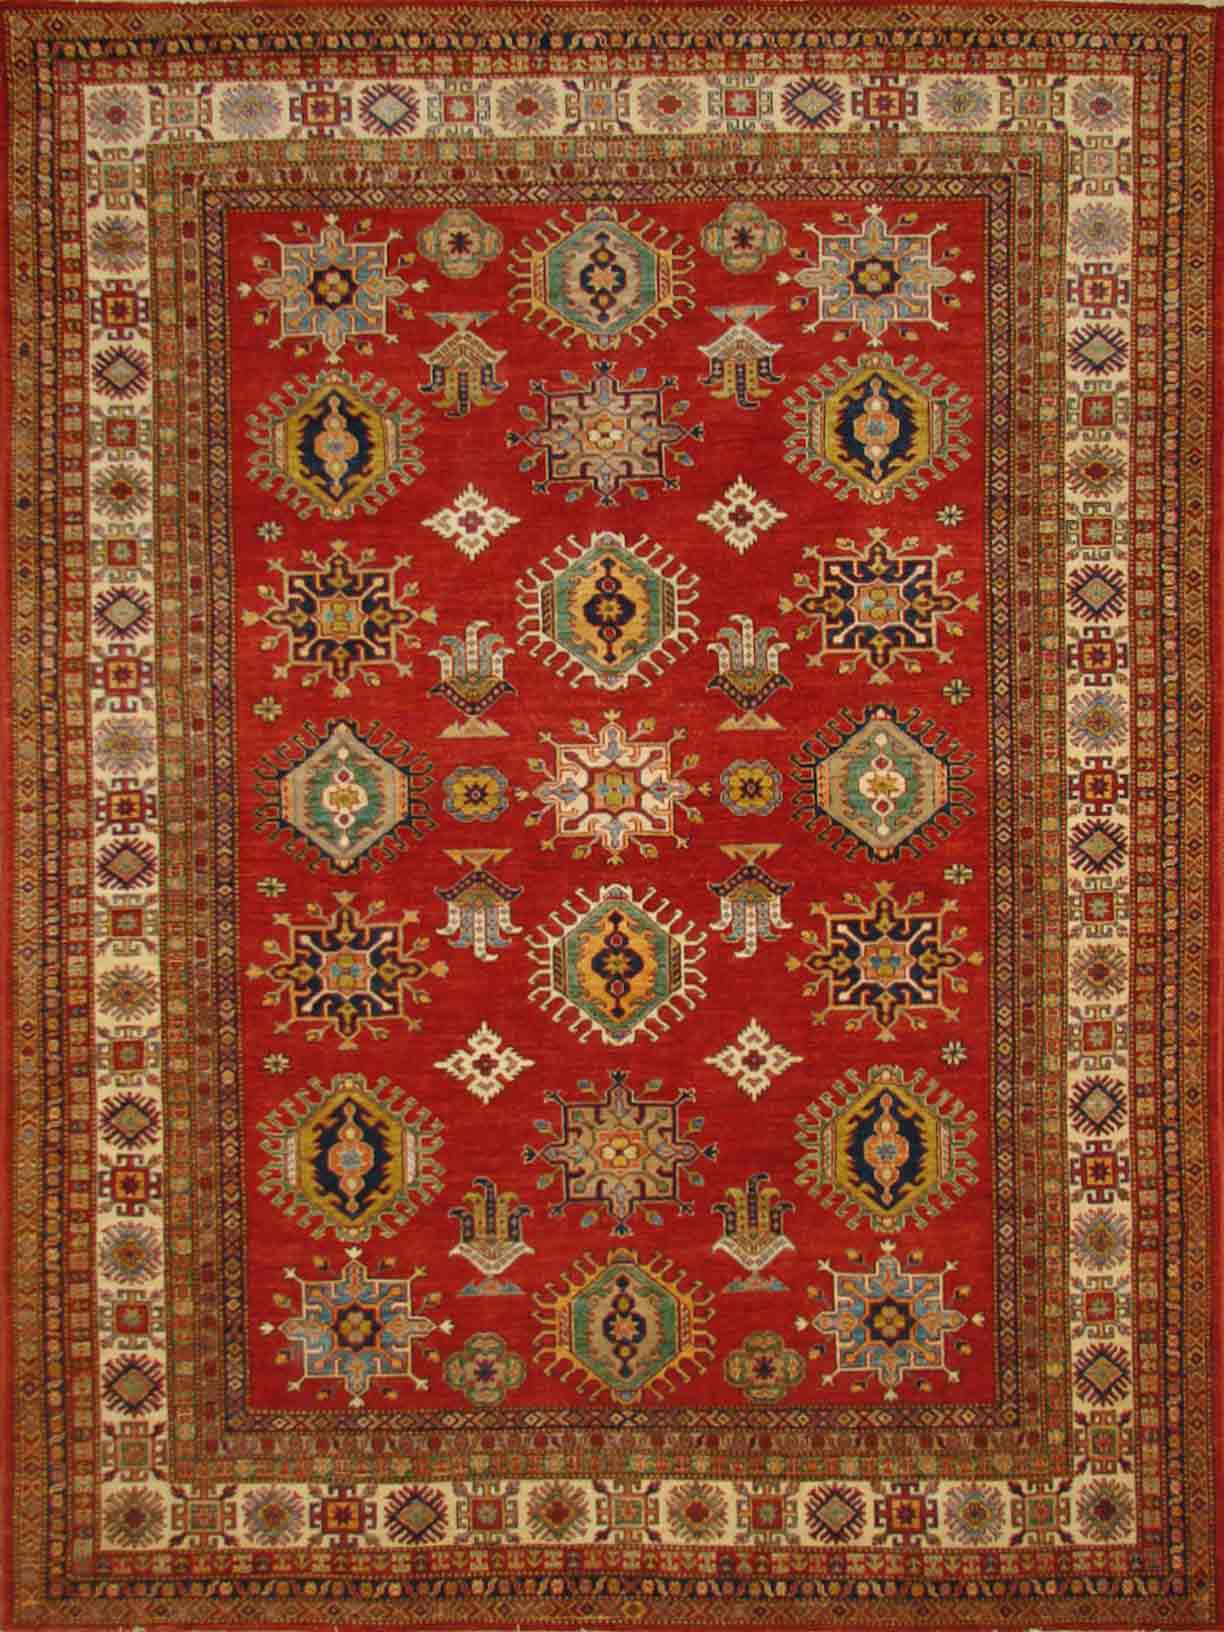 Antique Style Rugs SUPER KAZAK 18428 Red - Burgundy & Ivory - Beige Hand Knotted Rug